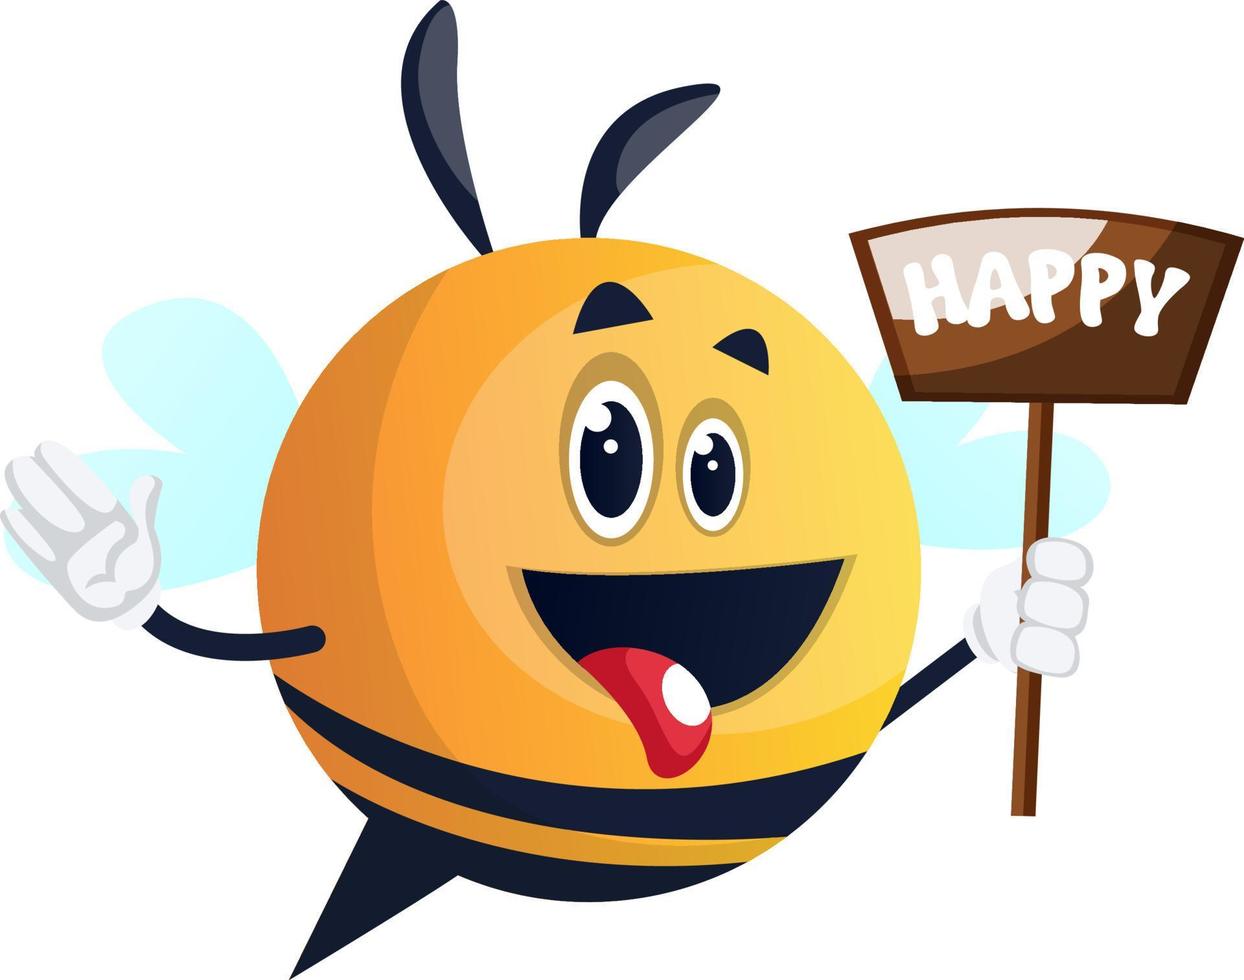 Happy bee, illustration, vector on white background.